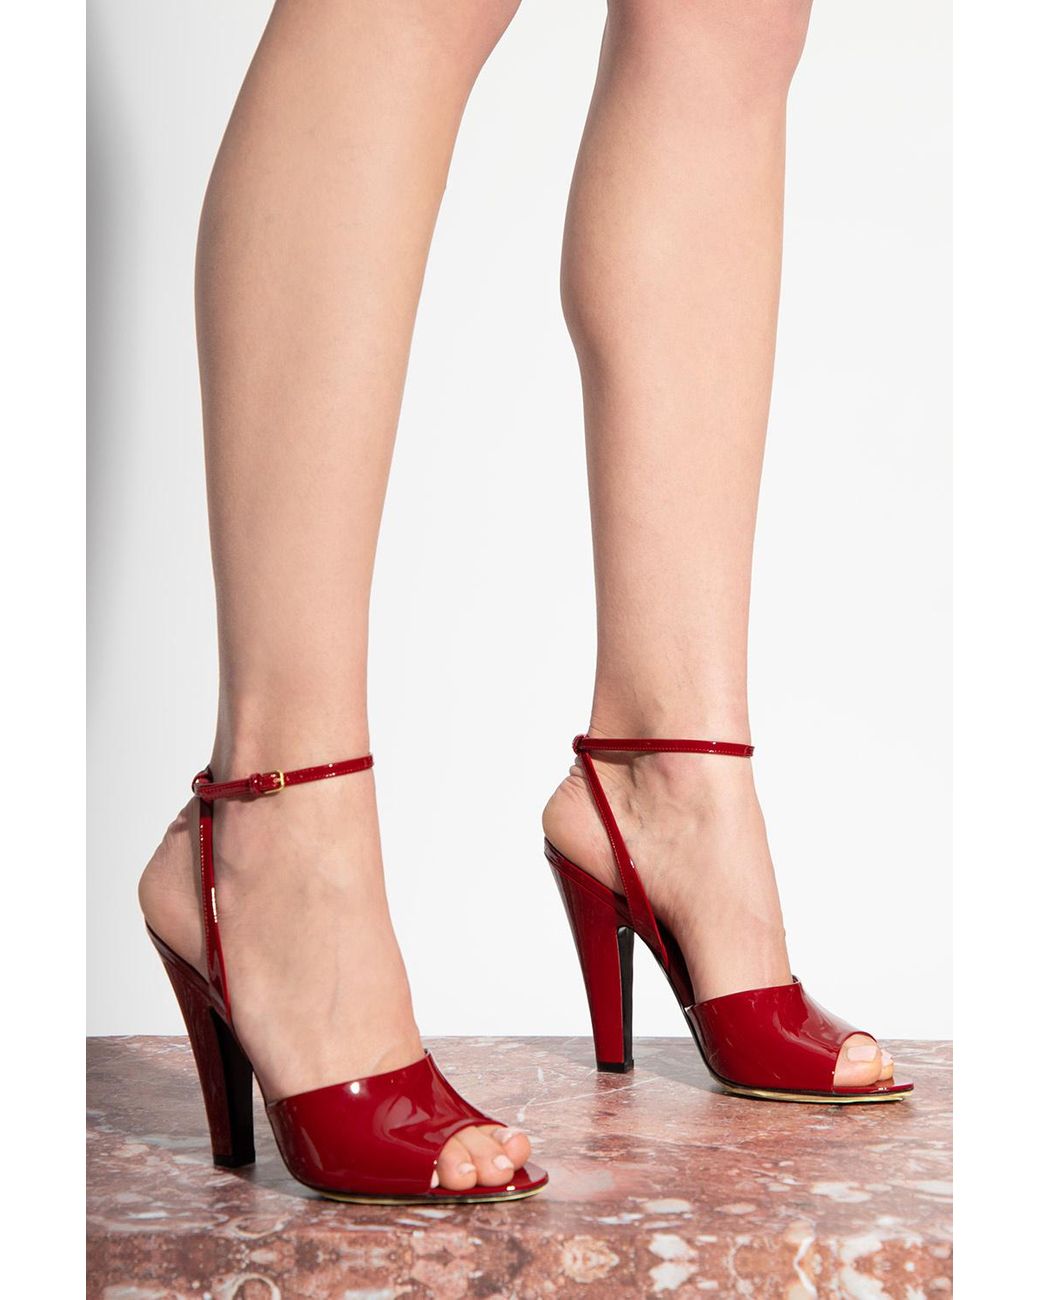 Saint Laurent 'scandale' Heeled Sandals in Red | Lyst